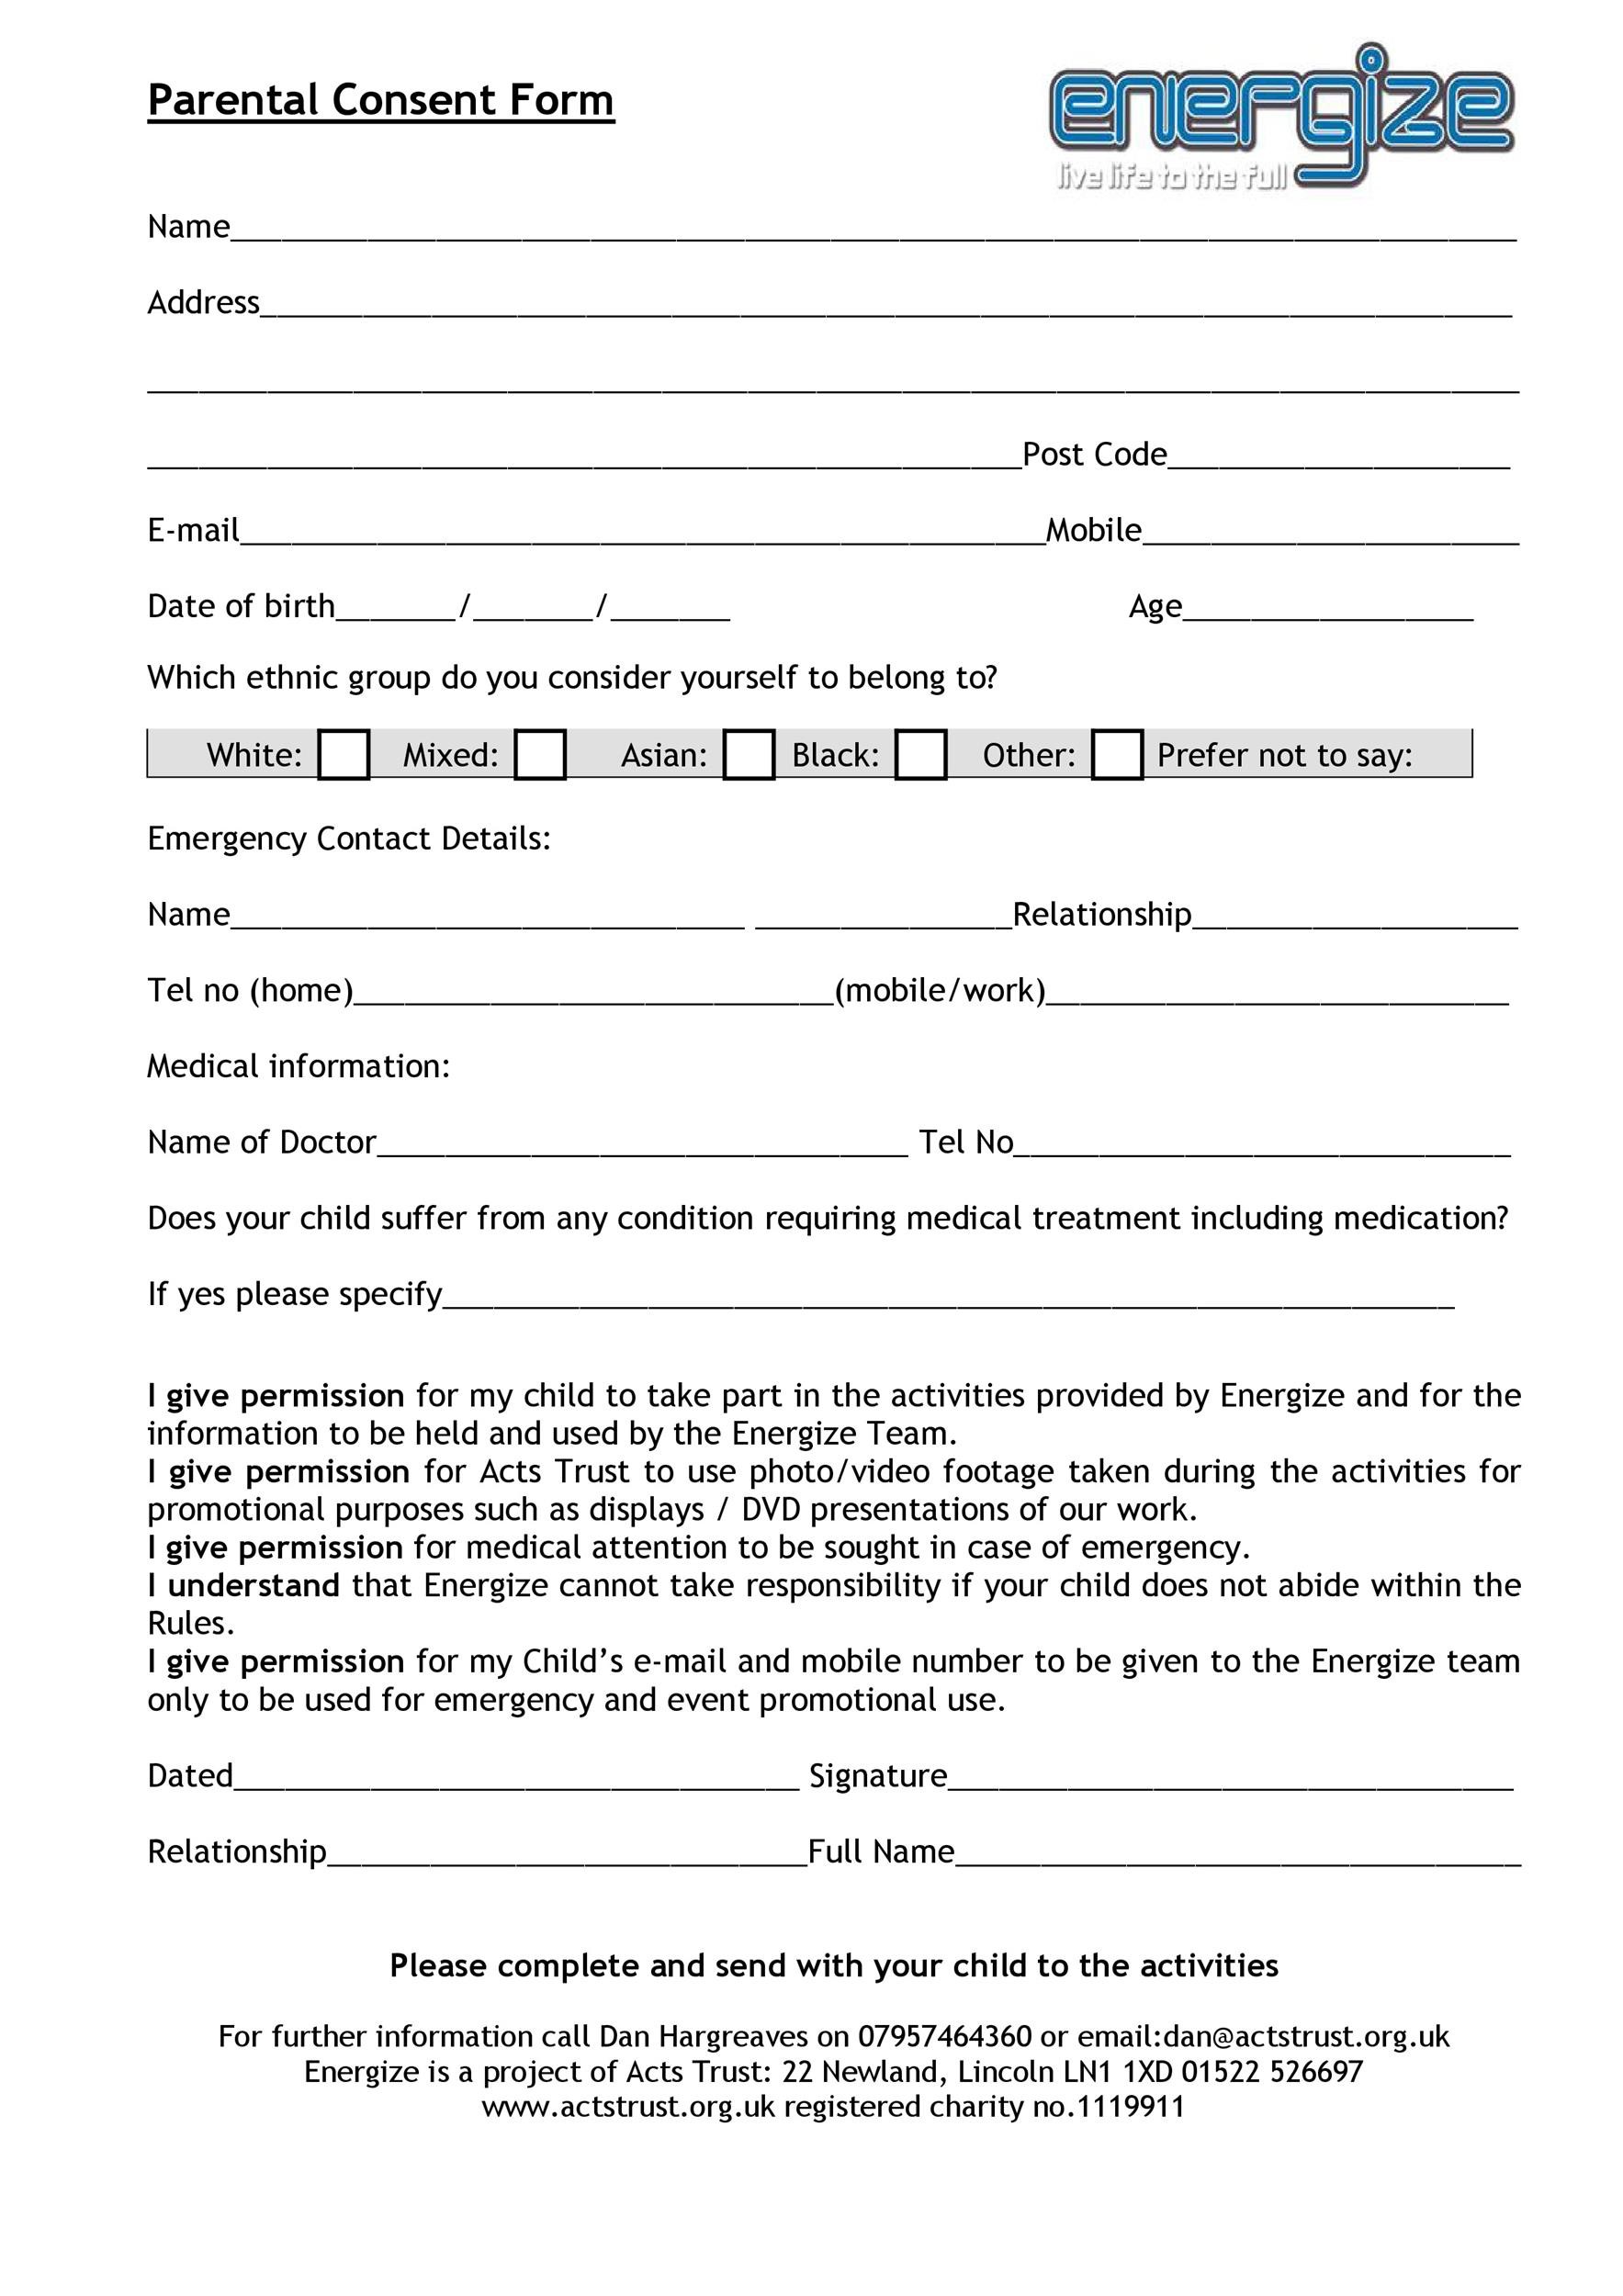 Free parental consent form template 02